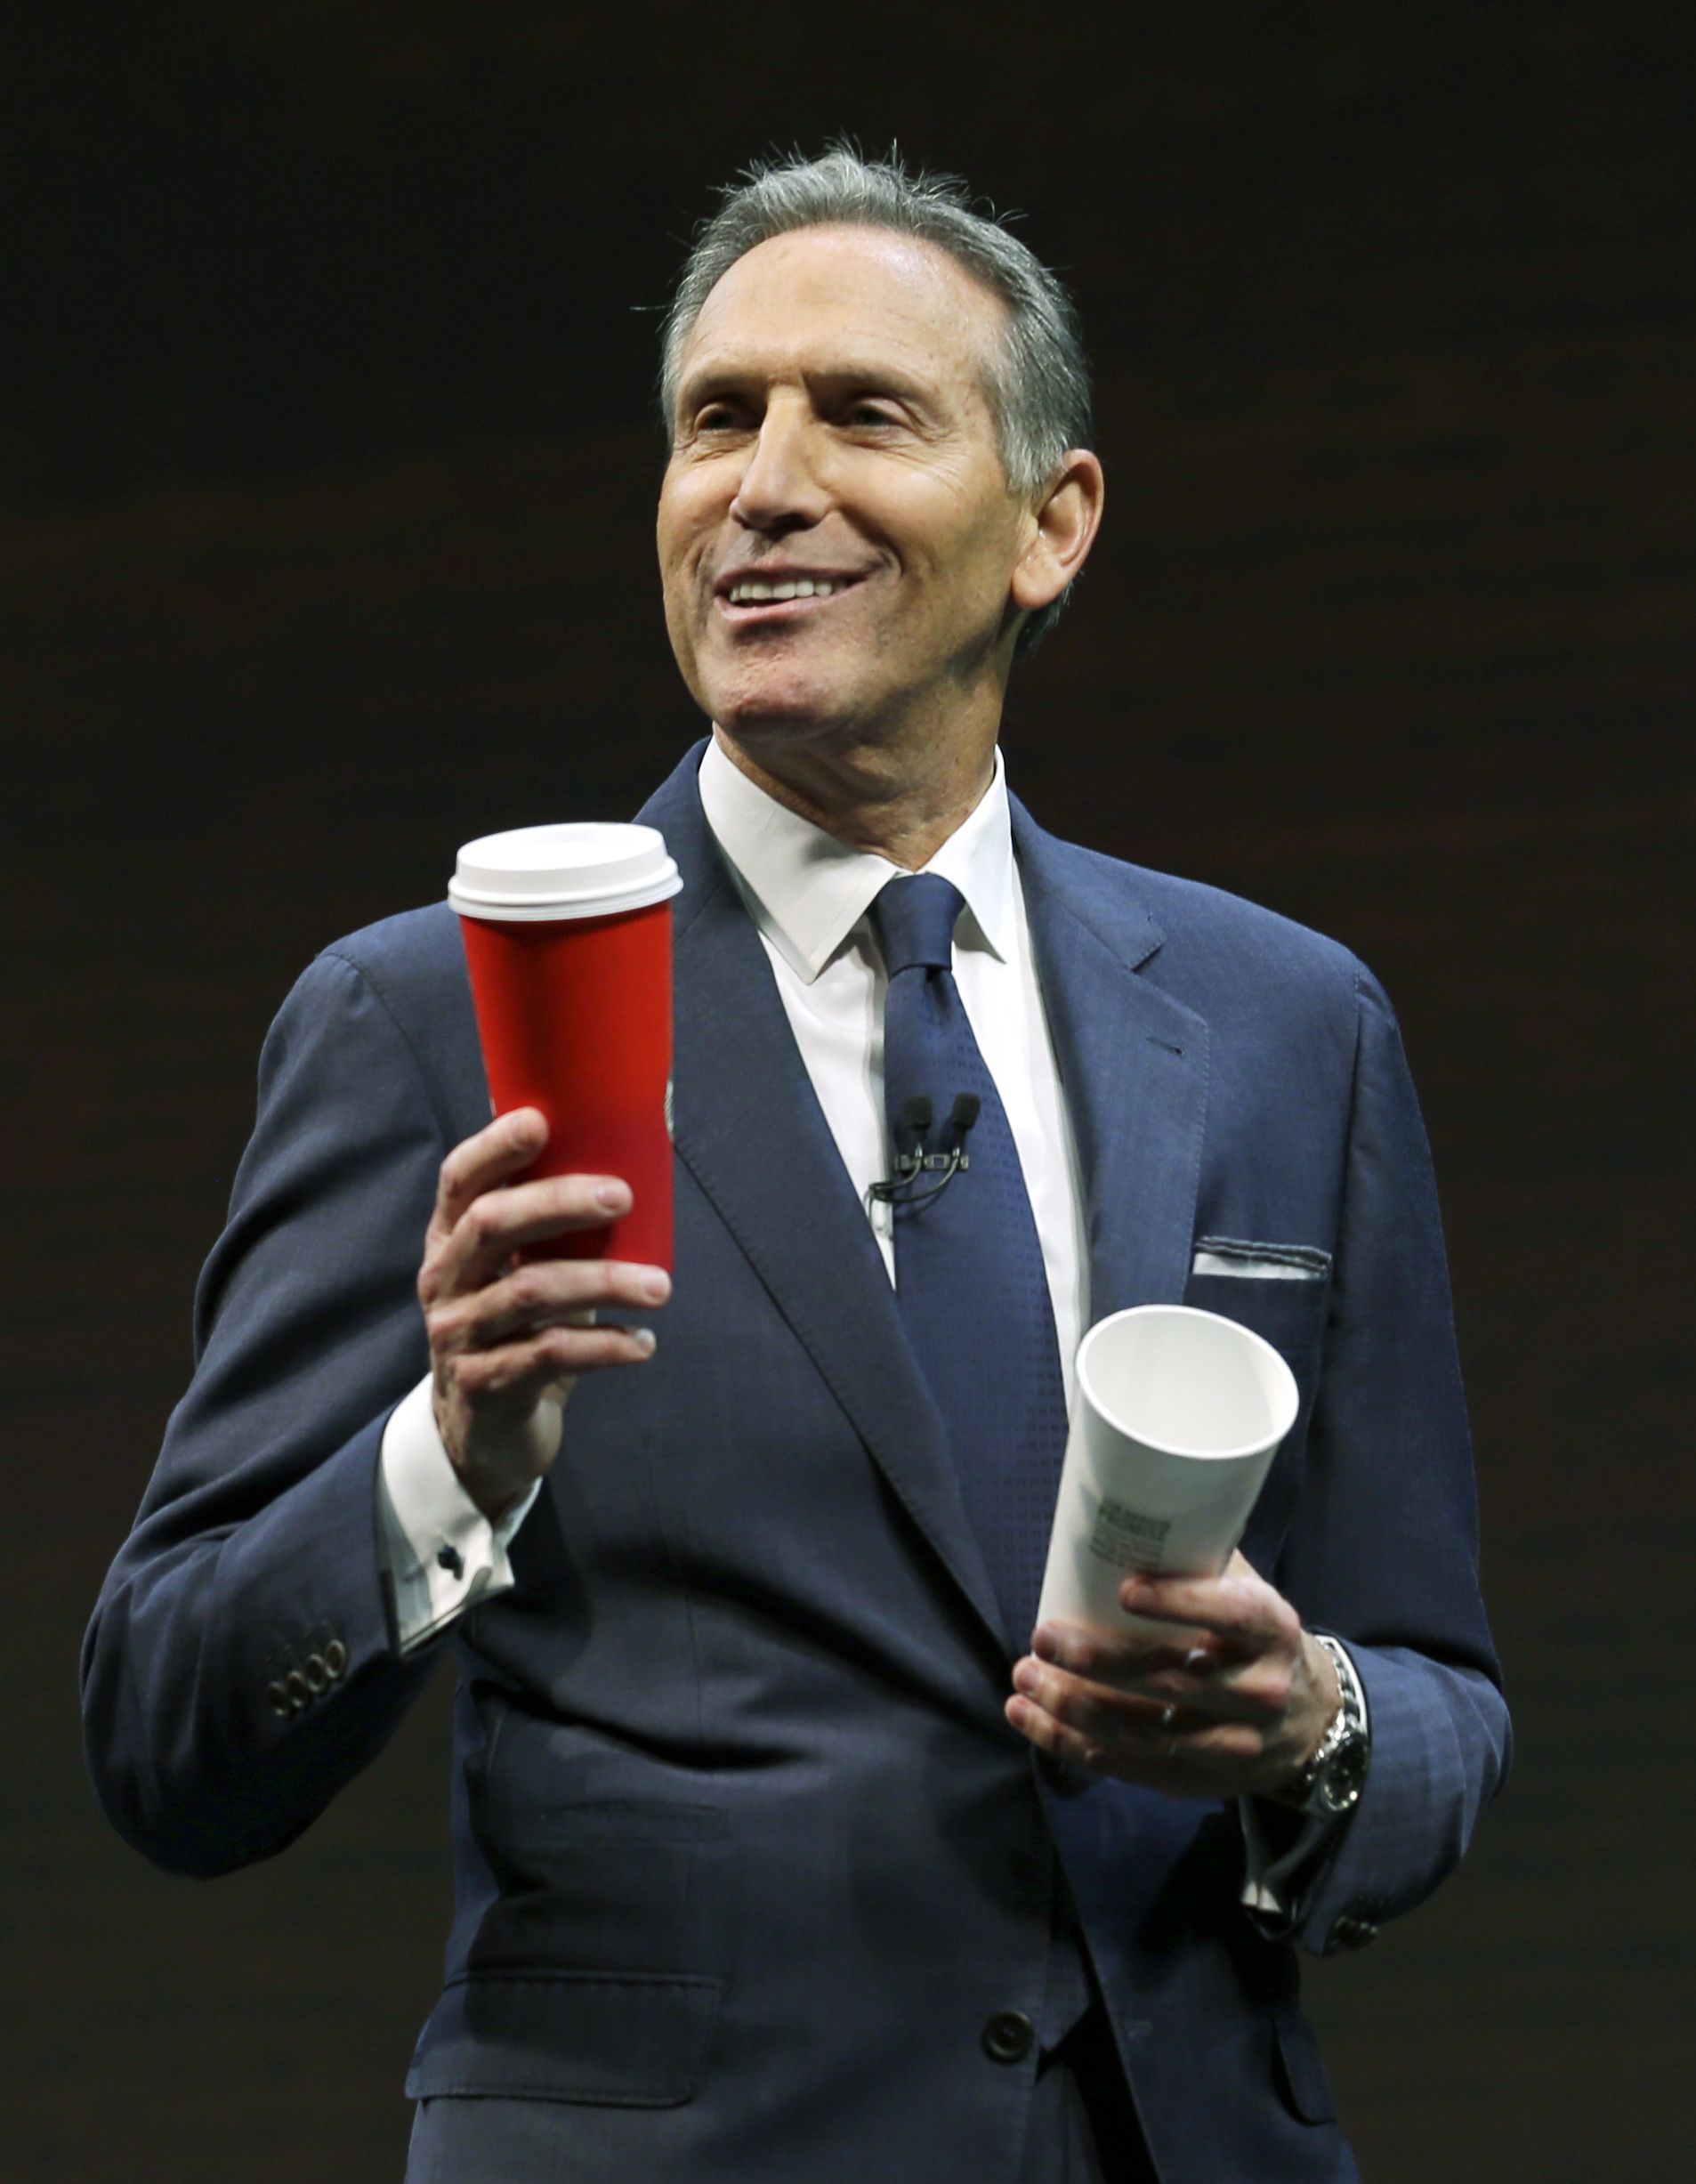 Starbucks CEO Howard Schultz holds one of the company’s red holiday cups as he speaks Wednesday at the company’s annual shareholders meeting in Seattle.